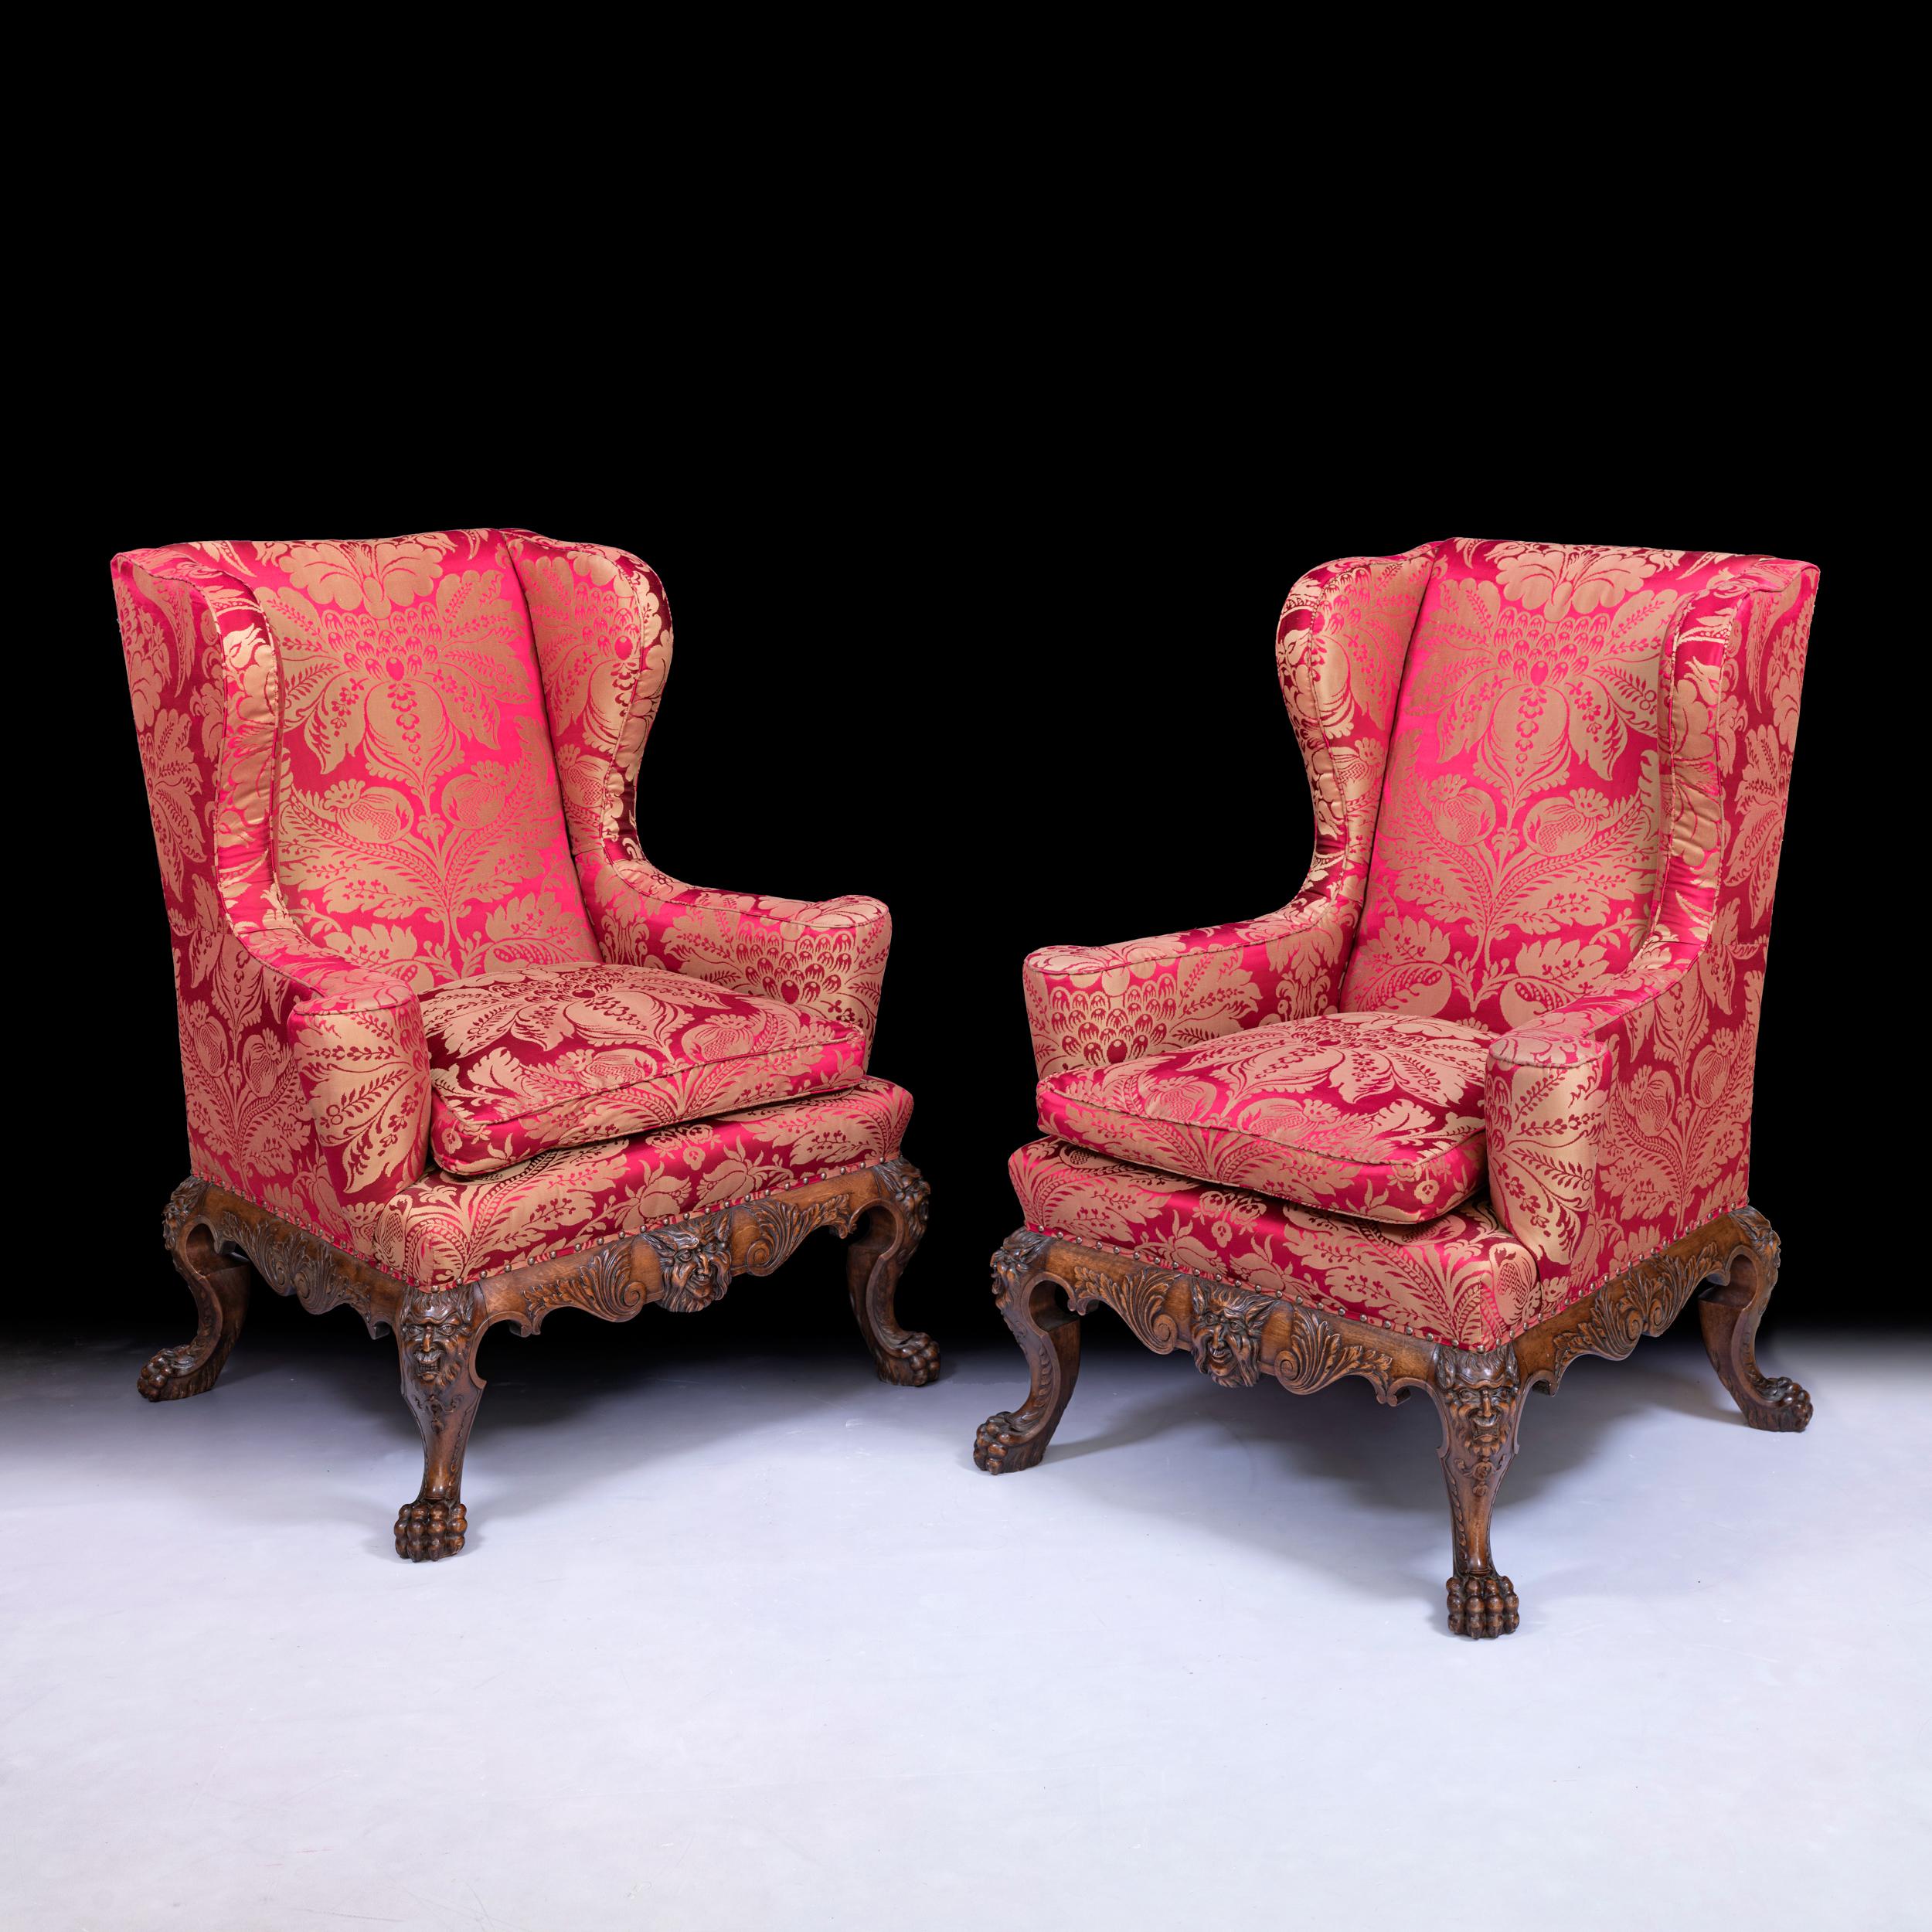 A very fine pair of 19th century Irish George II style wingback chairs upholstered in a silk demask, the substantial cabriole front legs with naturalistic ball and claw feet and beautifully carved with masks to each knee overlapping the deep and